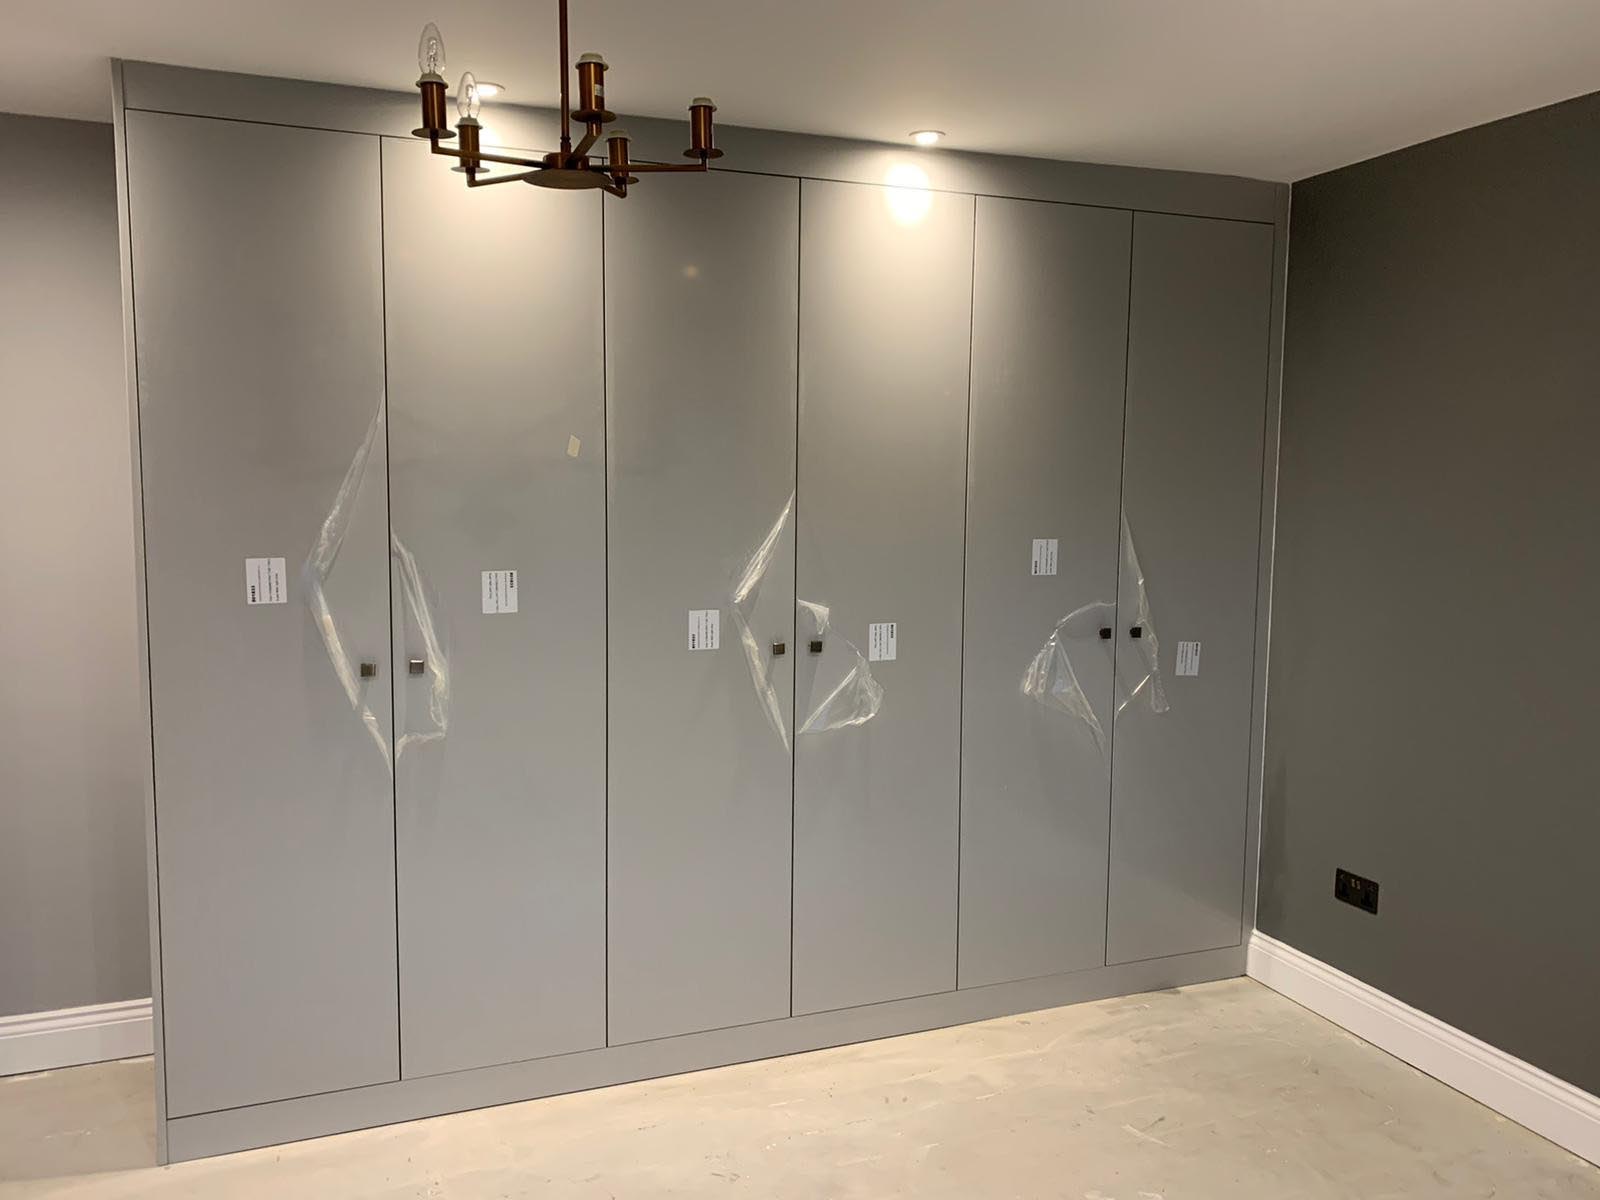 Fitted wardrobe designed, supplied and installed by Hampdens KB